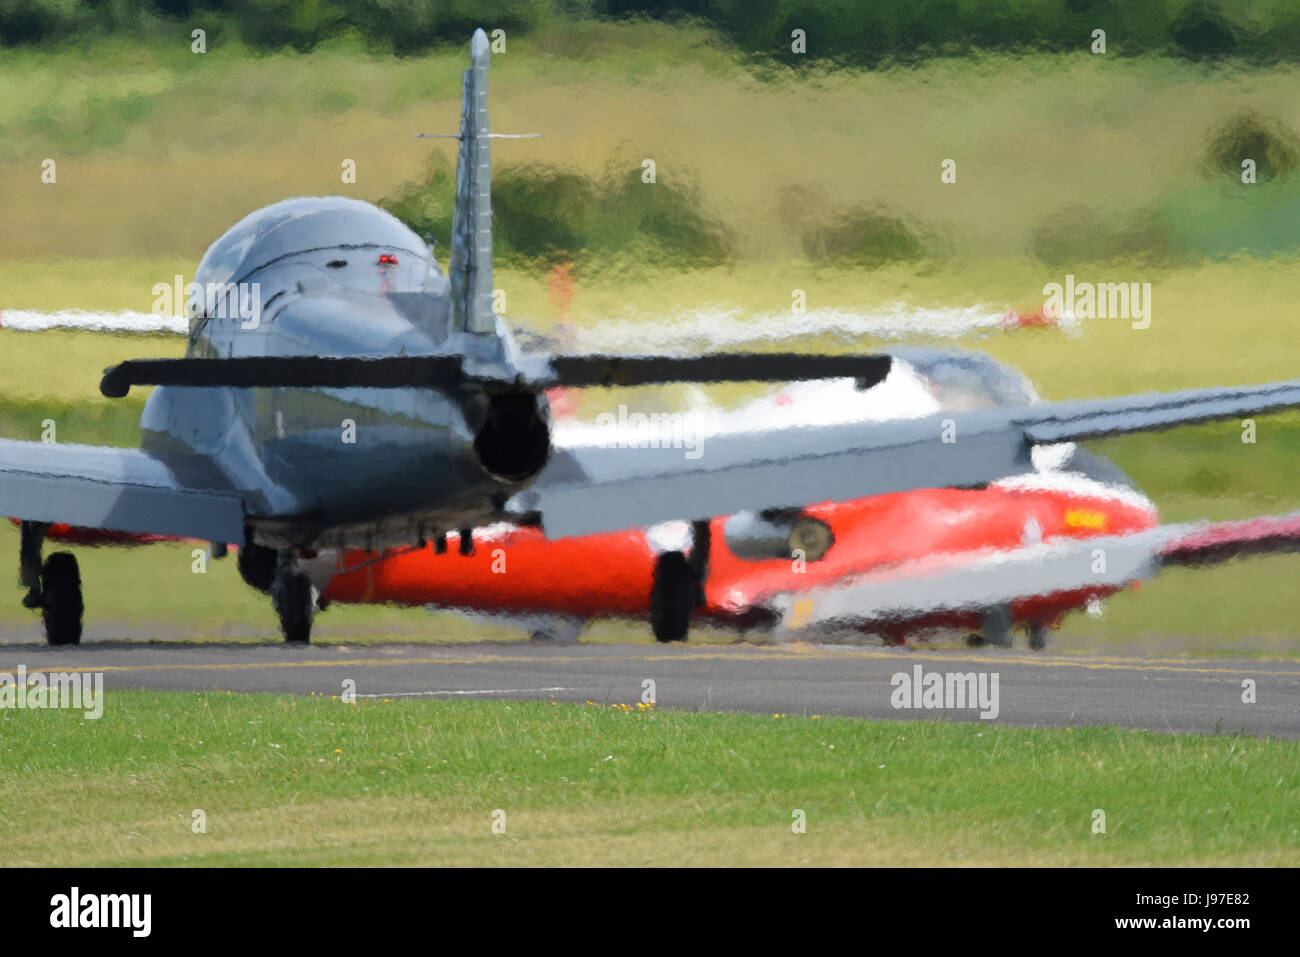 BAC Strikemaster following a Jet Provost T5 onto the runway, creating a heat haze of 'jelly air' from their combined exhausts. Space for copy Stock Photo